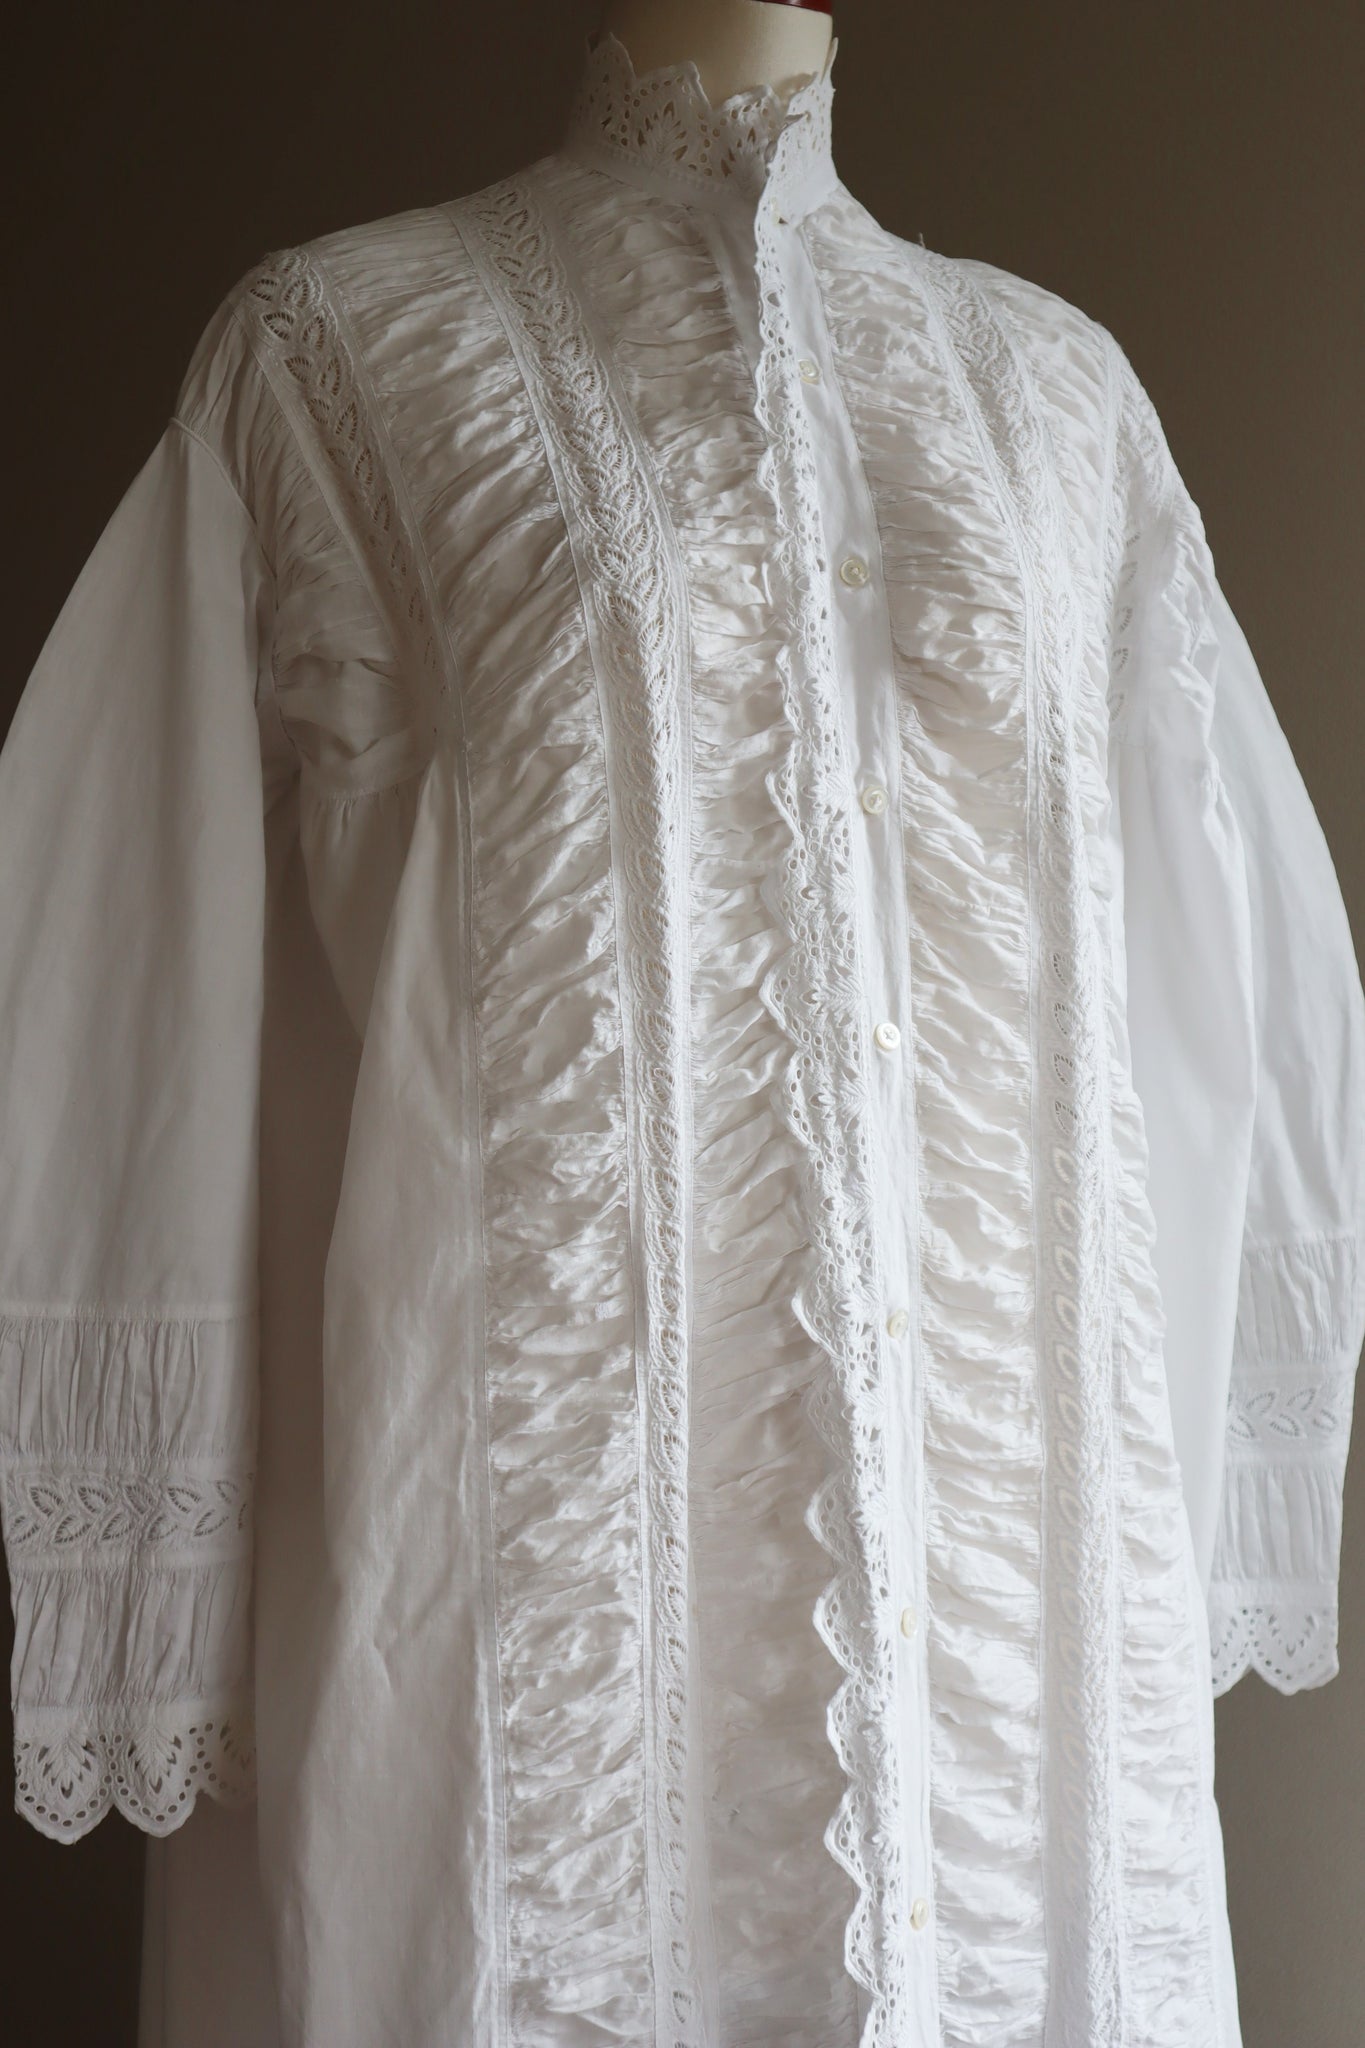 1900s Hand Embroidery Leaf Gather Design White Cotton Long Dress